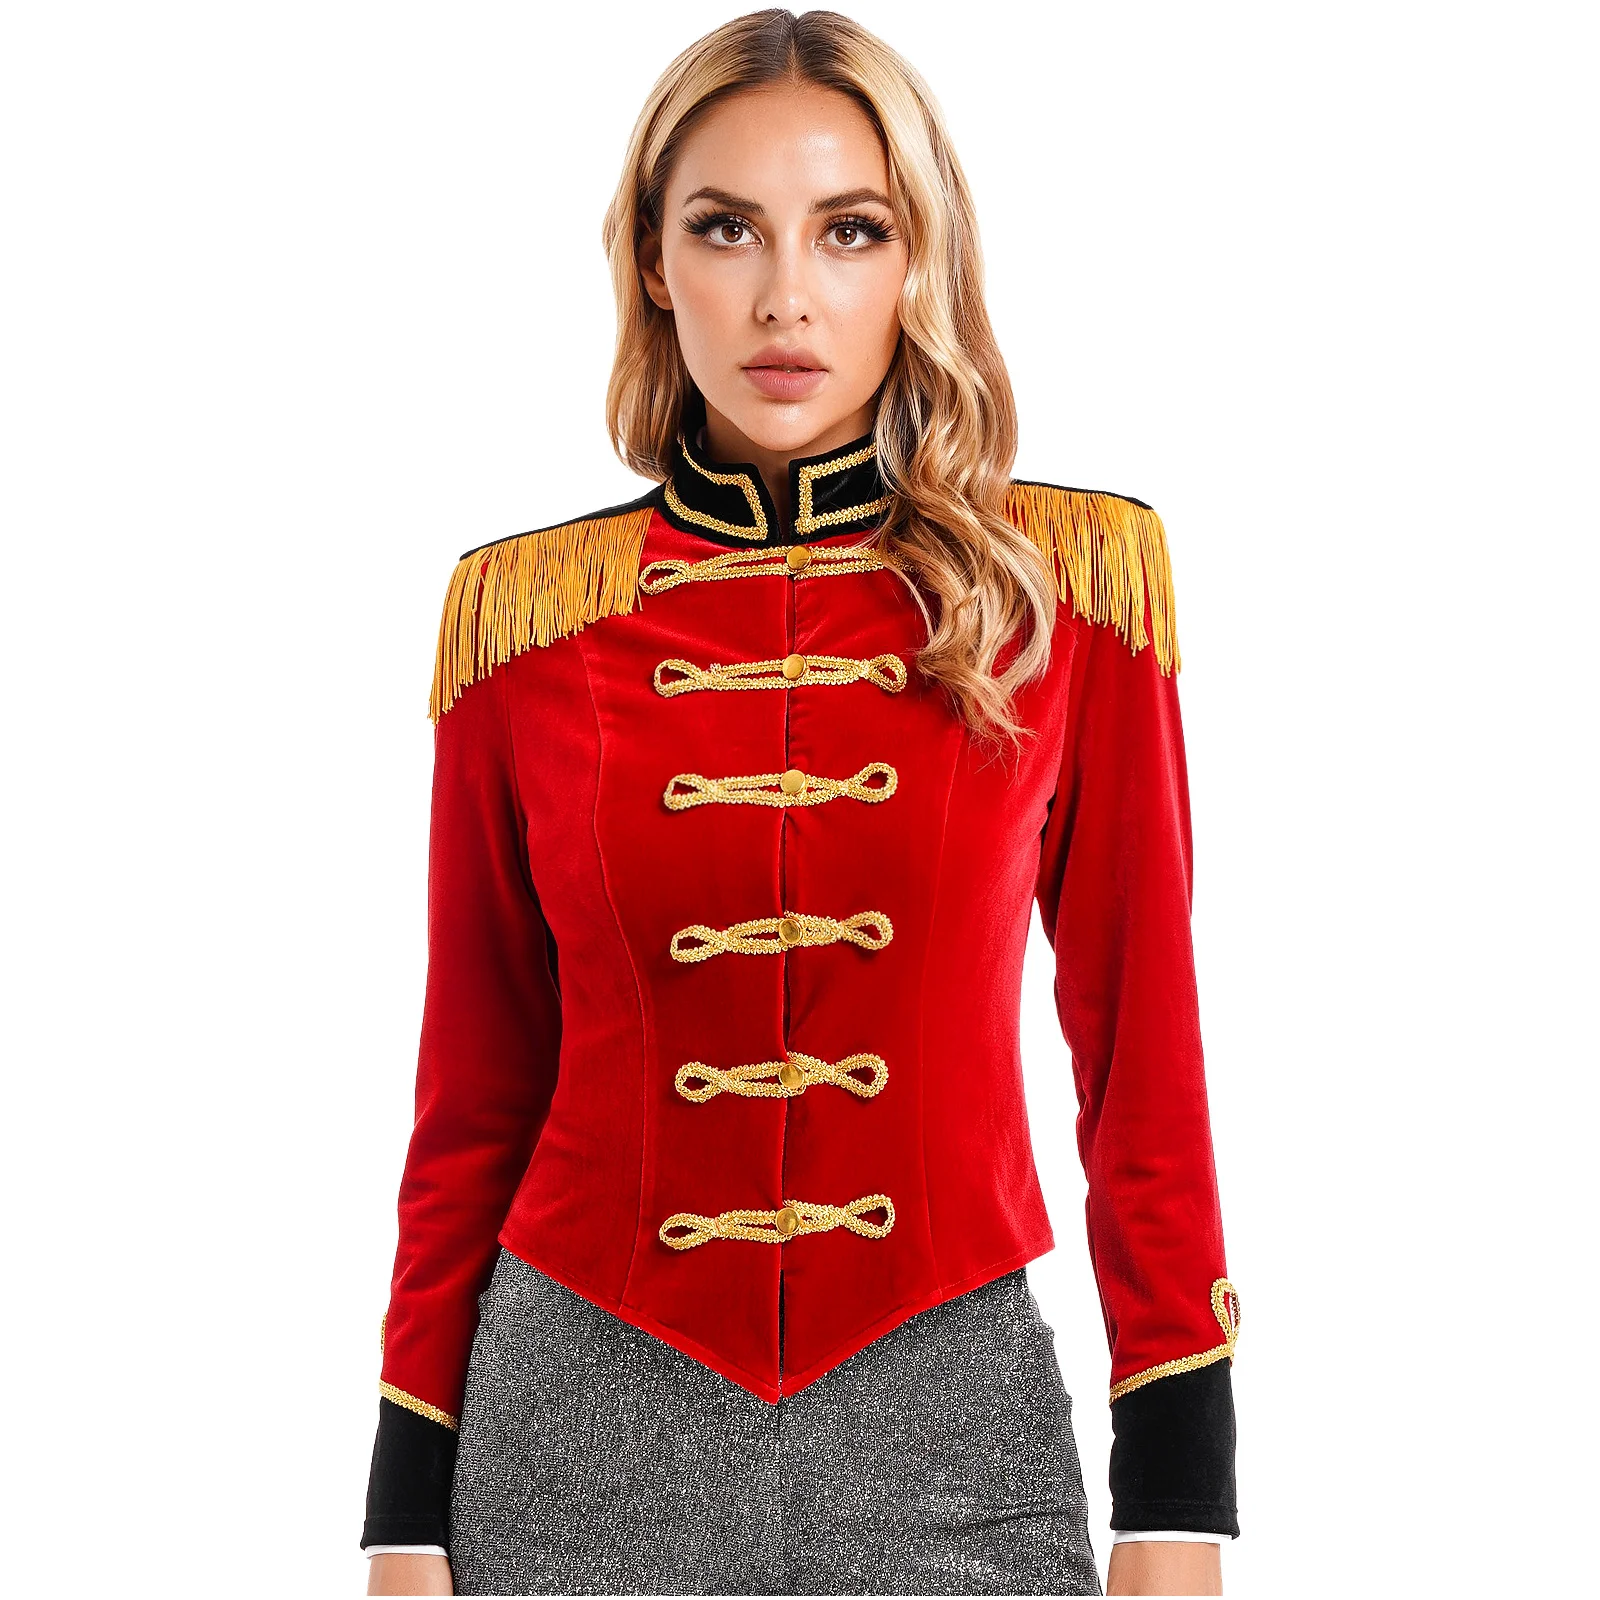 Womens Circus Ringmaster Costume Stand Collar Fringed Shoulder Board Velvet Jacket Coat Halloween Carnival Party Cosplay Costume